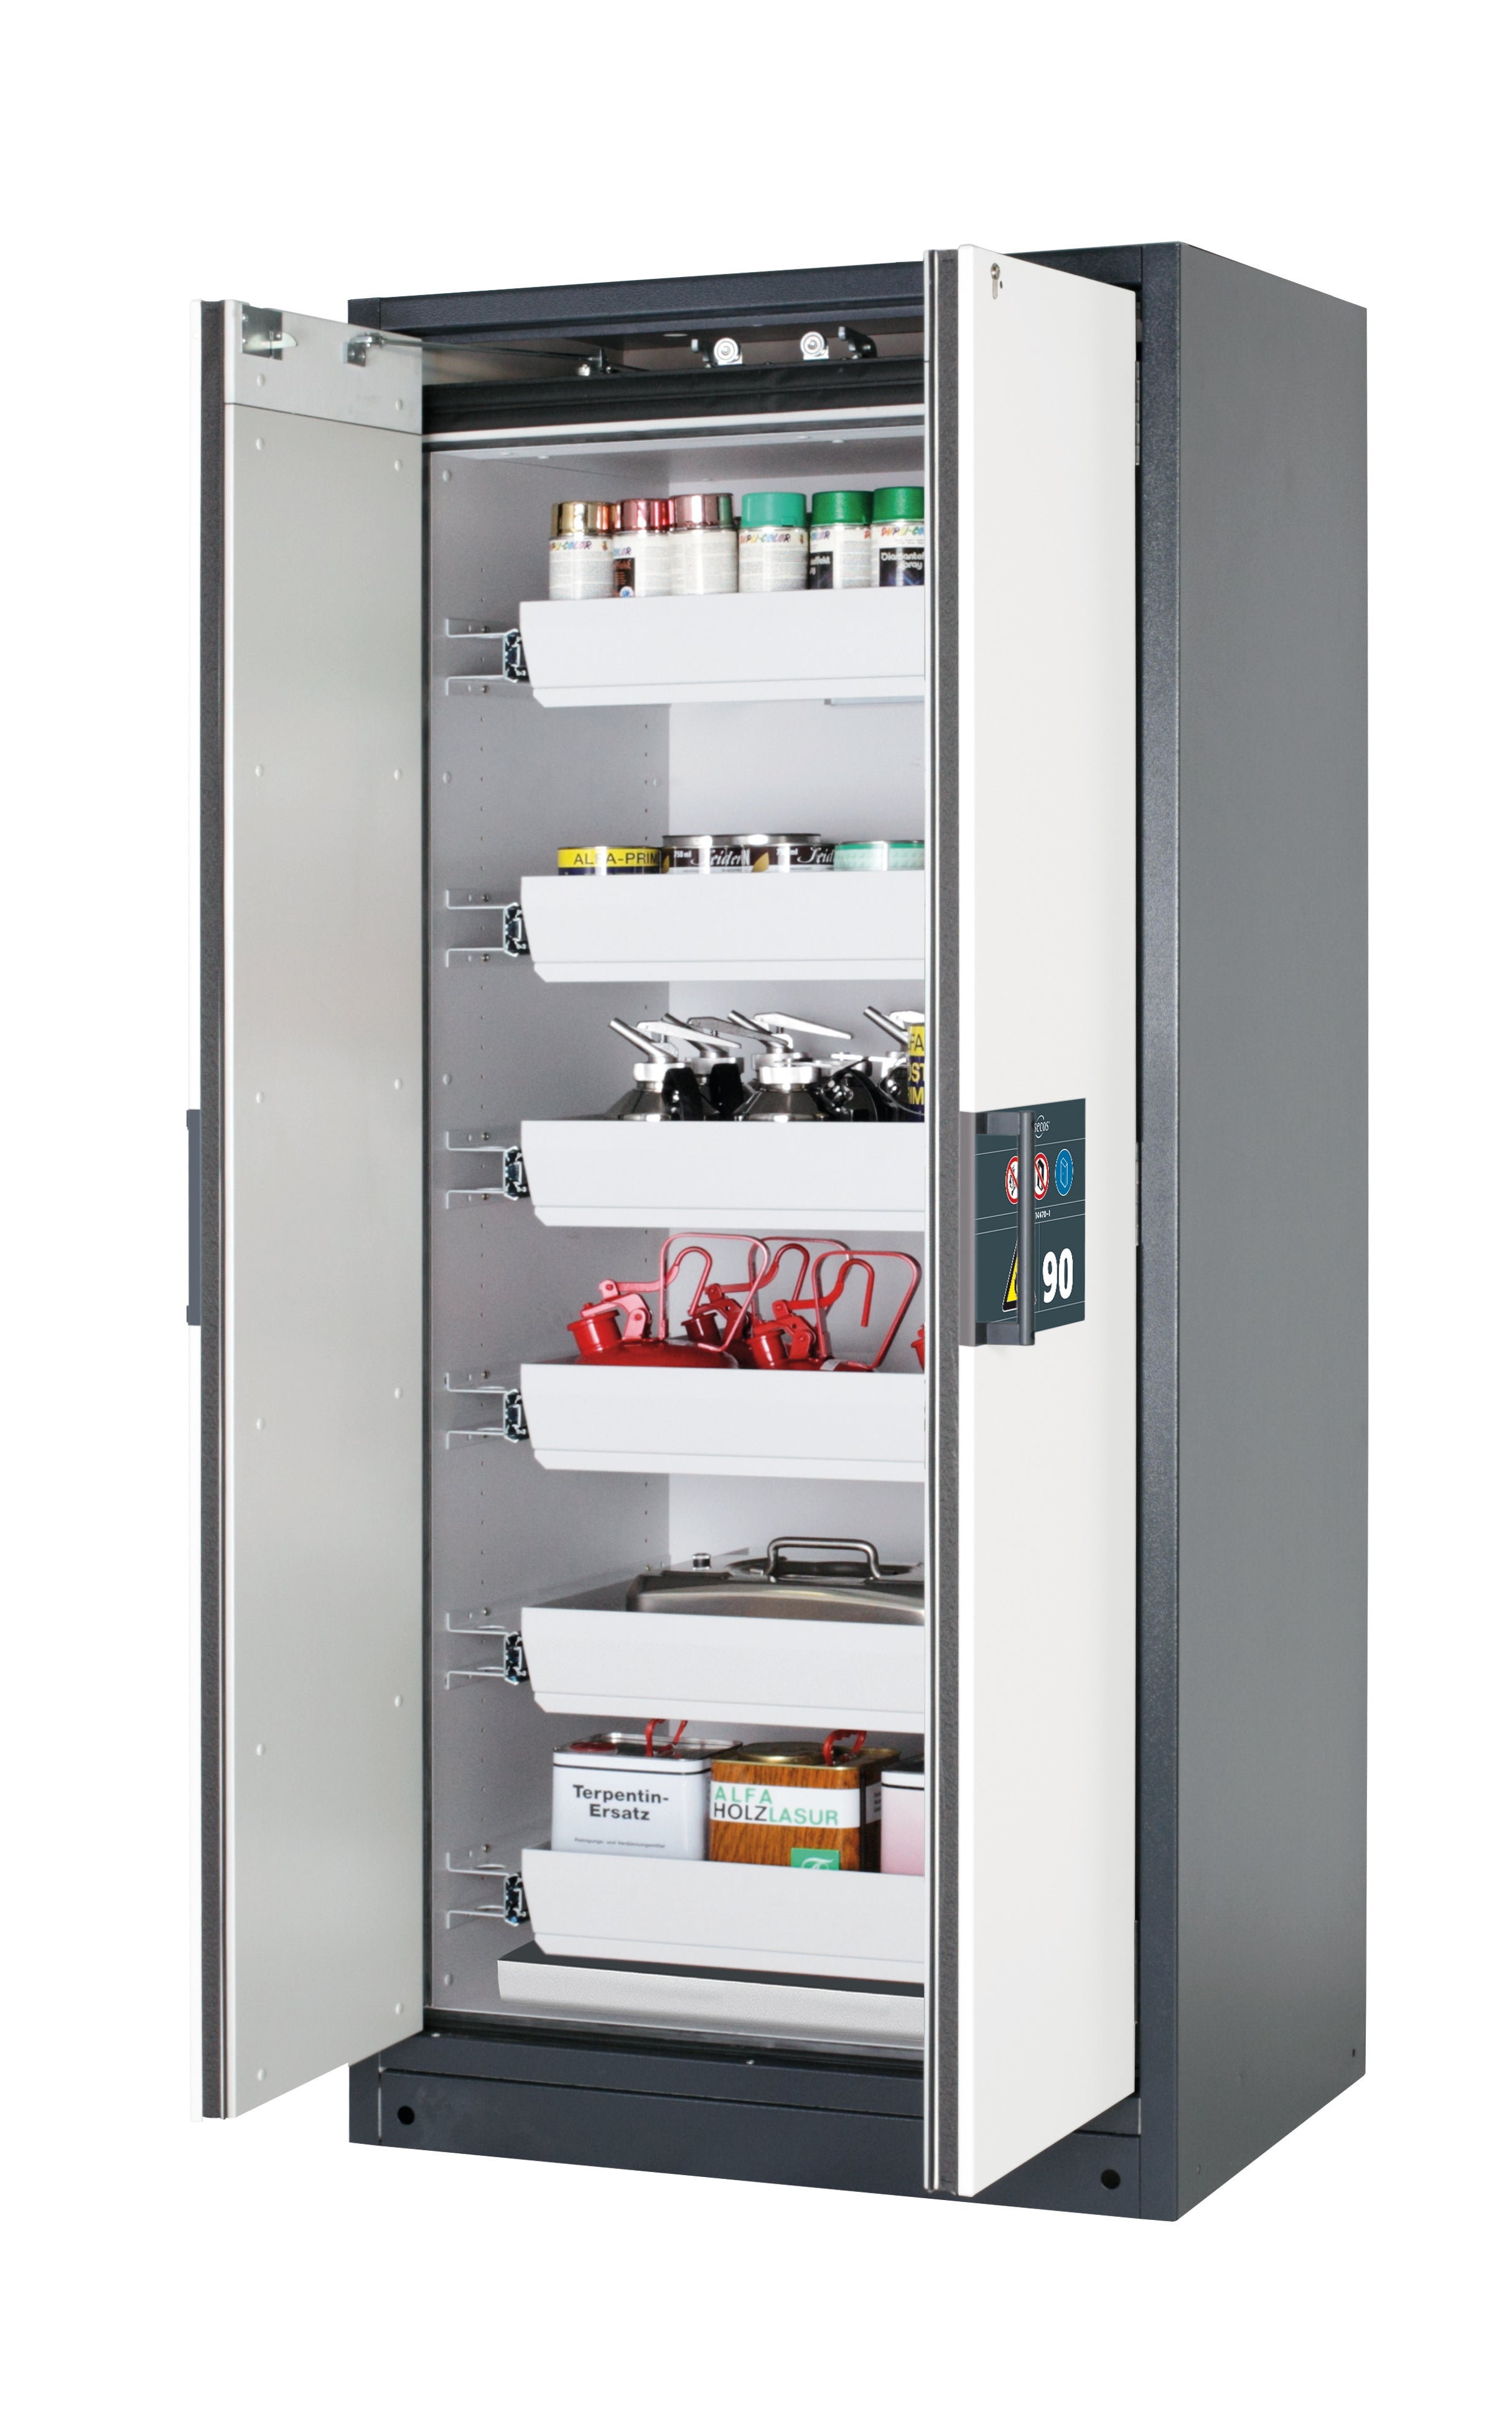 Type 90 safety storage cabinet Q-PEGASUS-90 model Q90.195.090.WDAC in pure white RAL 9010 with 6x drawer (standard) (sheet steel),